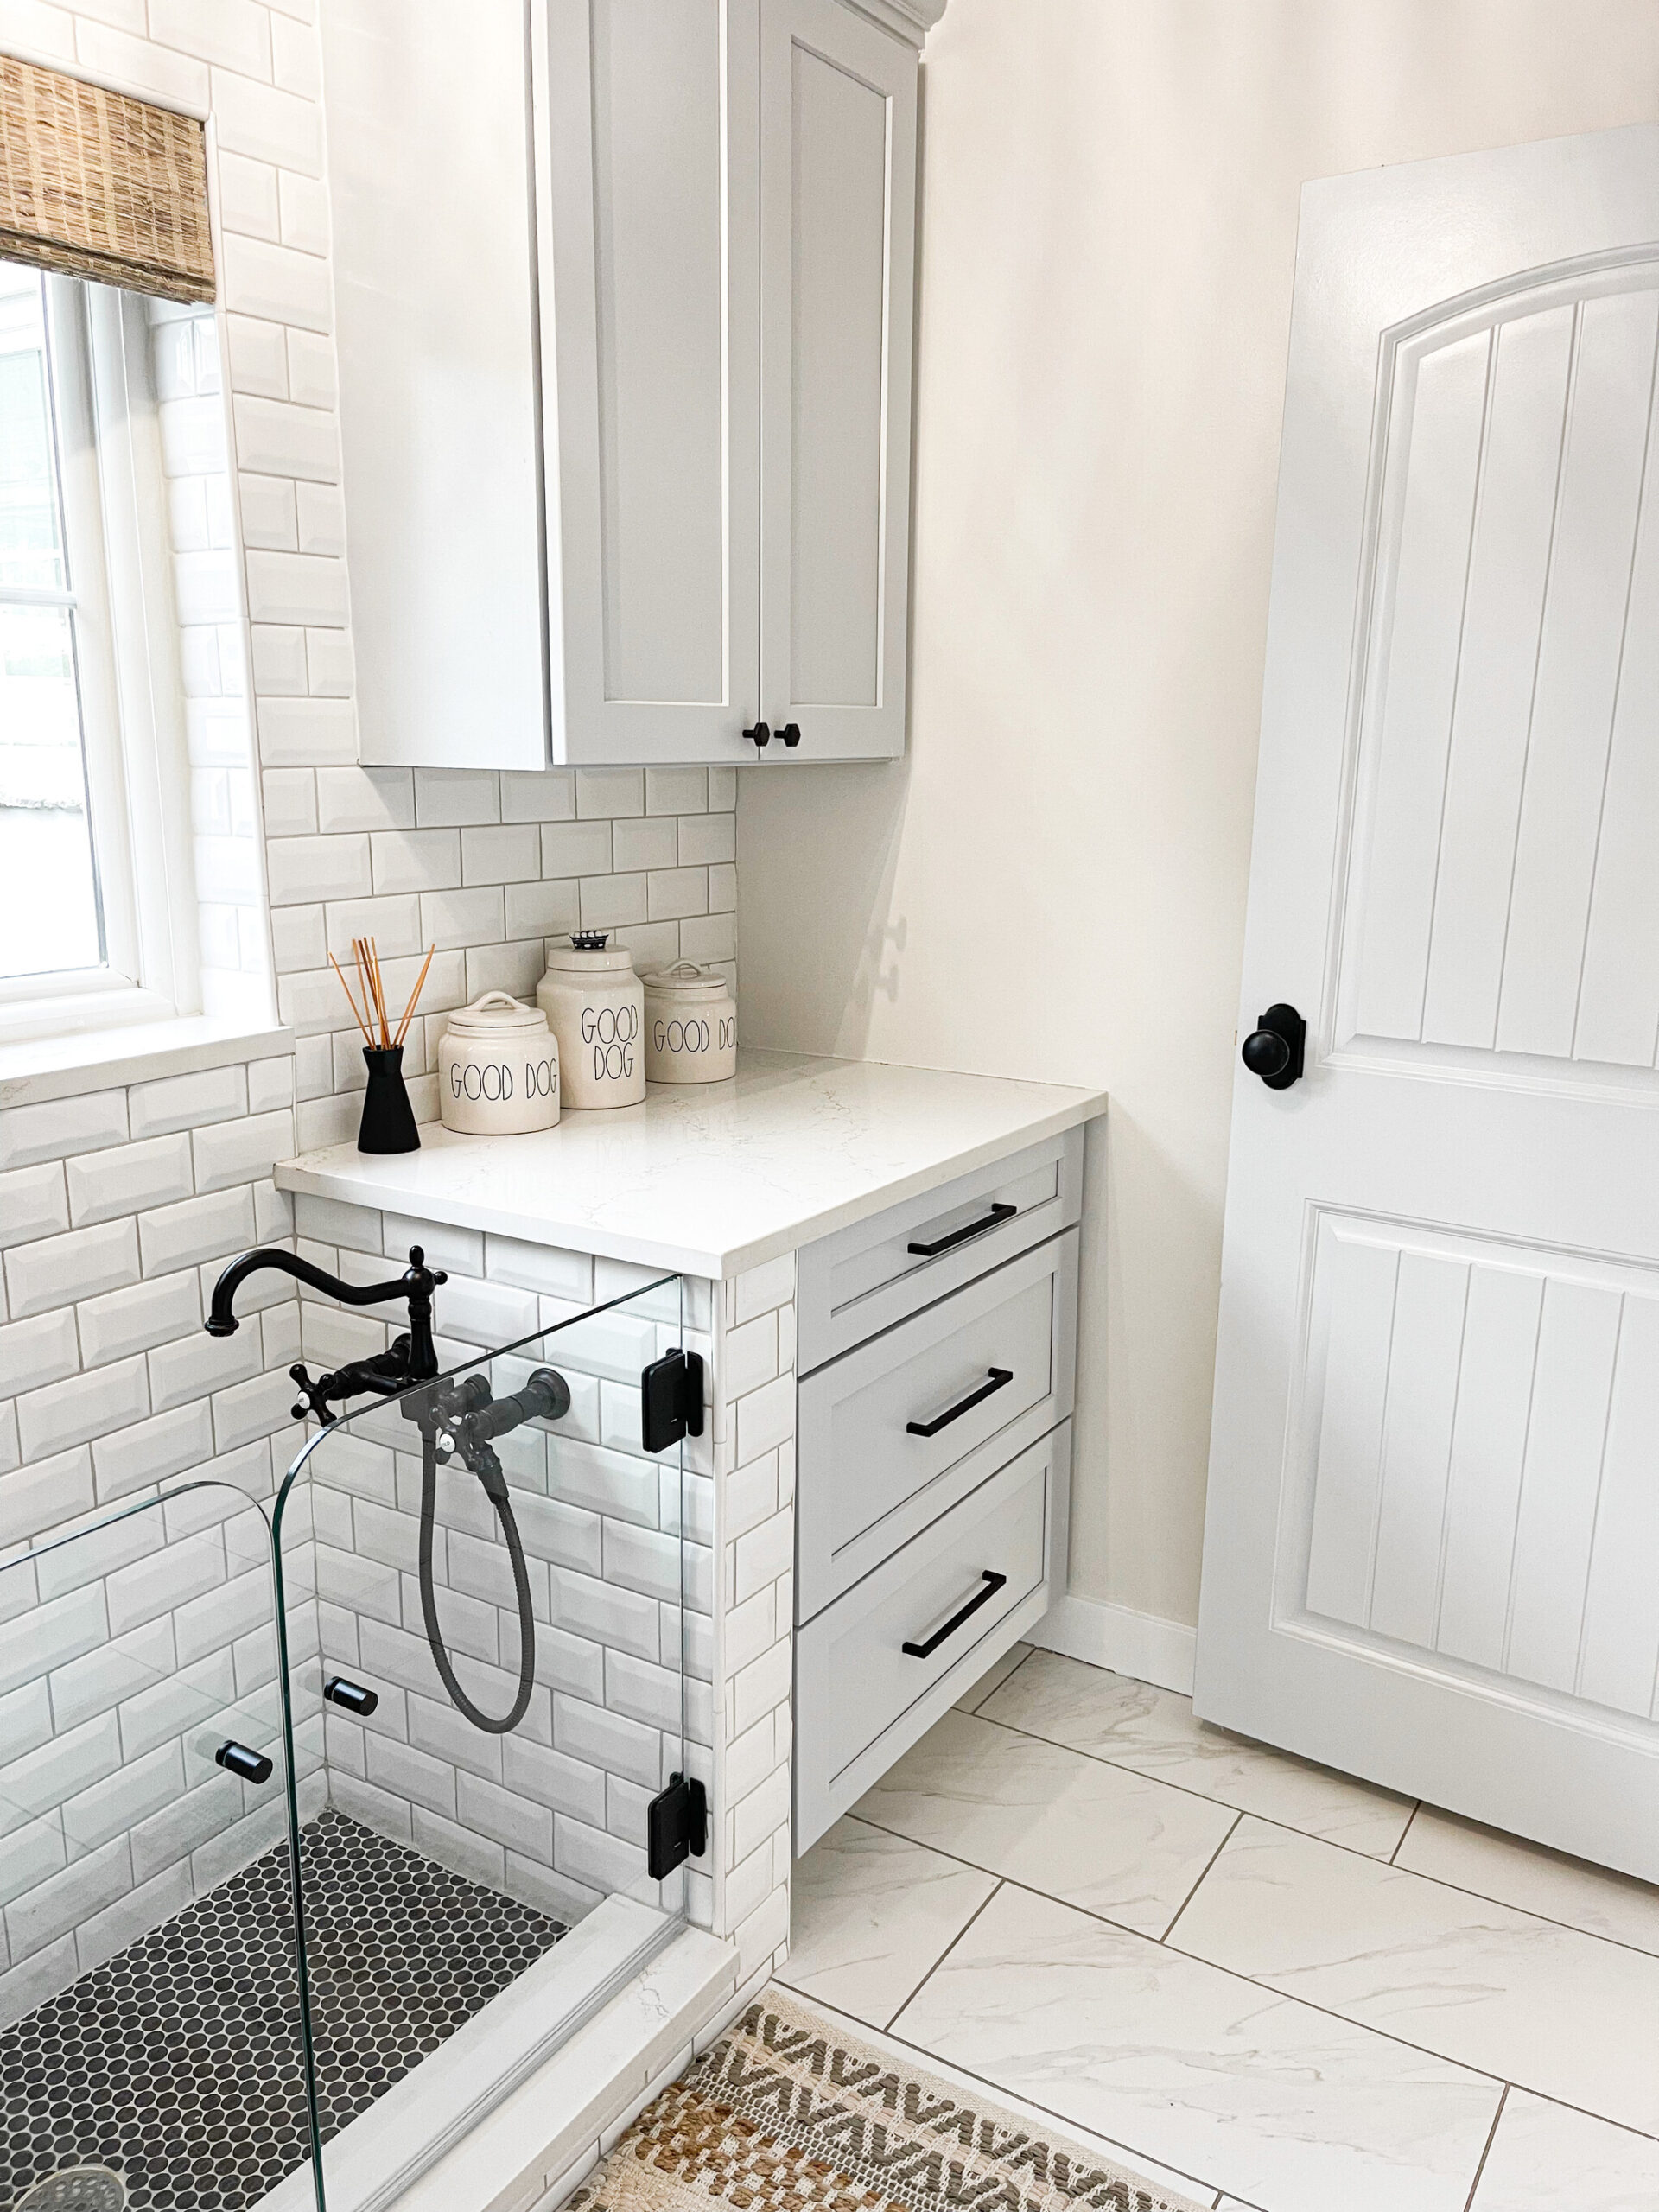 Modern mud room with black hardware, white tile, and a dog washing station